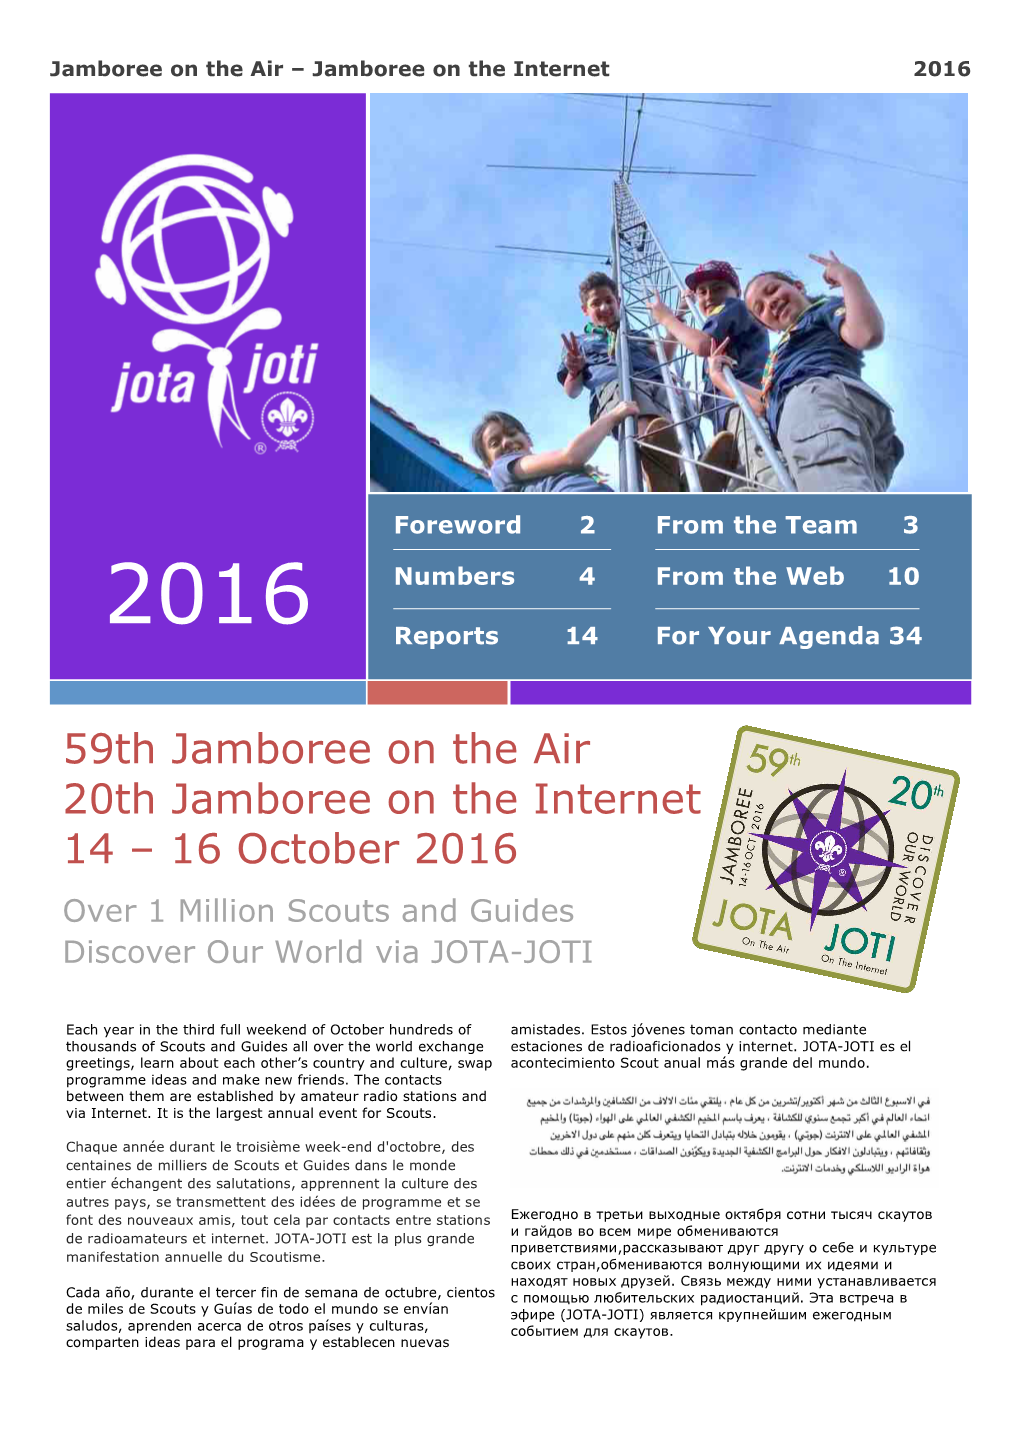 59Th Jamboree on the Air 20Th Jamboree on the Internet 14 – 16 October 2016 Over 1 Million Scouts and Guides Discover Our World Via JOTA-JOTI